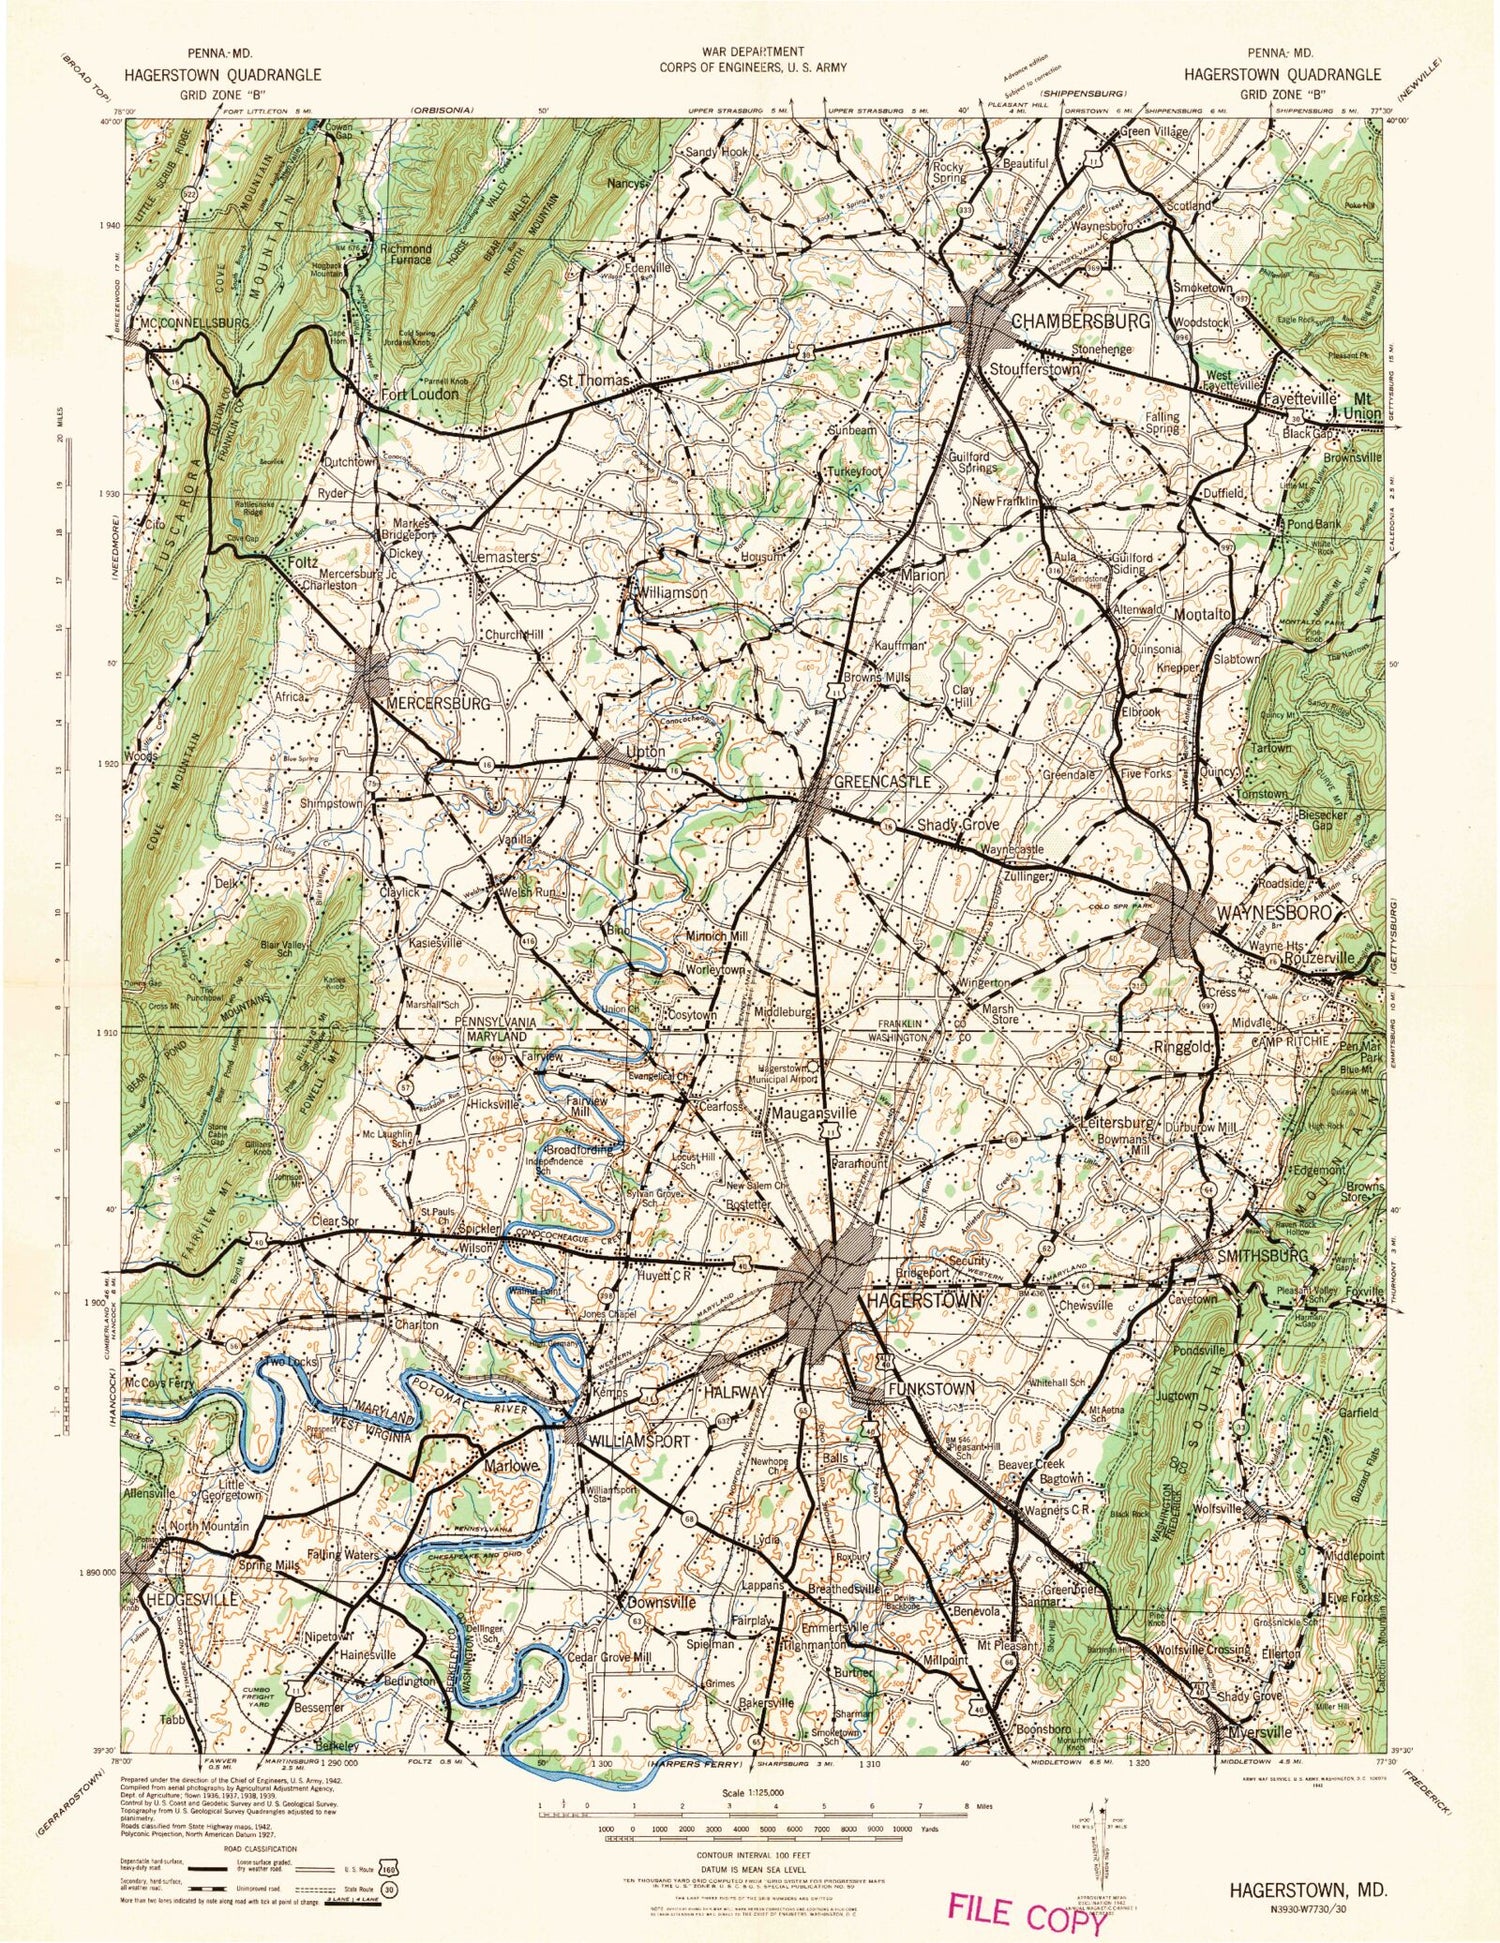 Historic 1942 Hagerstown Maryland 30'x30' Topo Map Image